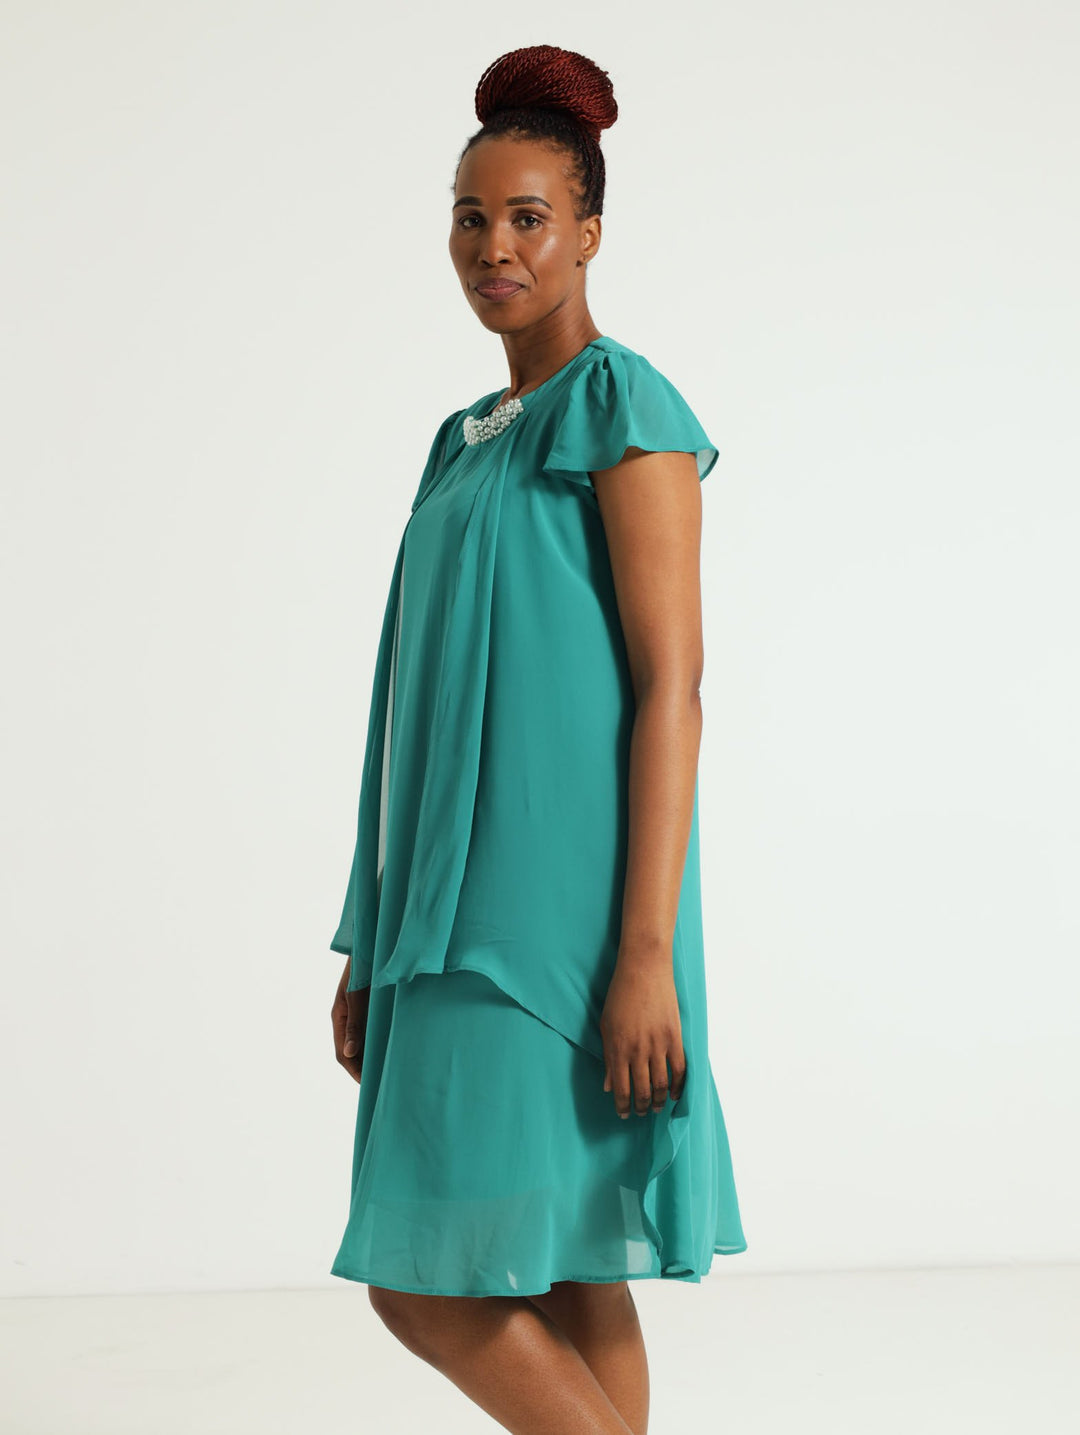 Cap Sleeve Overlay Dress With Pearl Trim - Teal